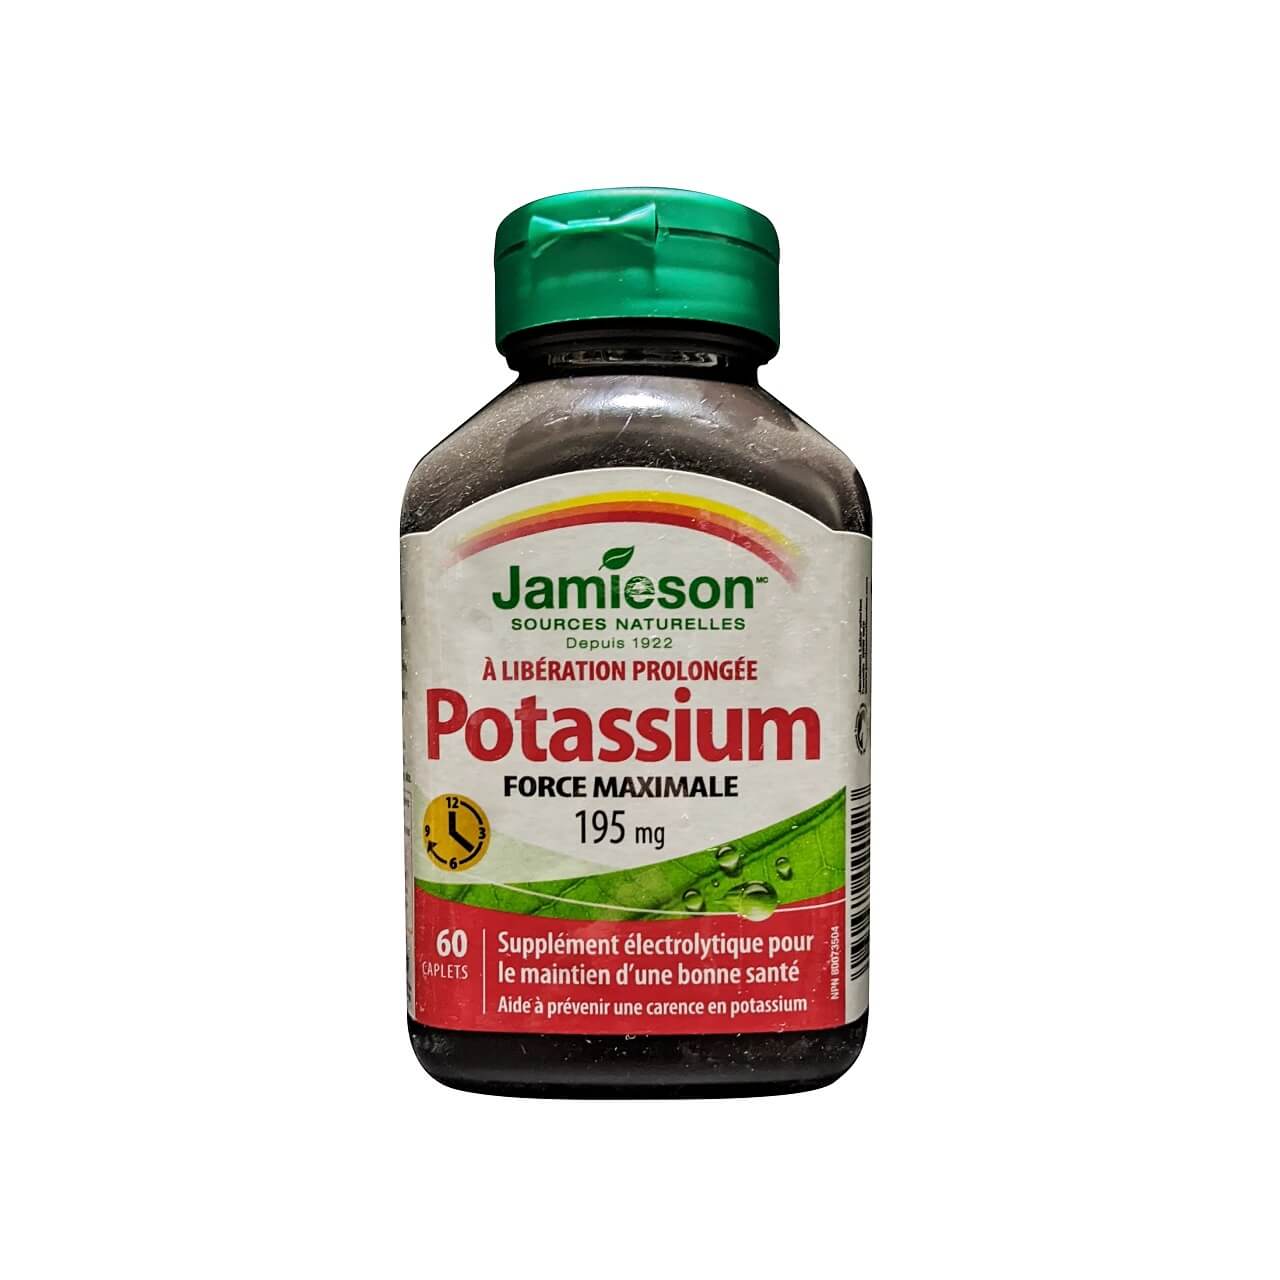 Product label for Jamieson Potassium 195 mg Maximum Strength Timed Release (60 caplets) in French